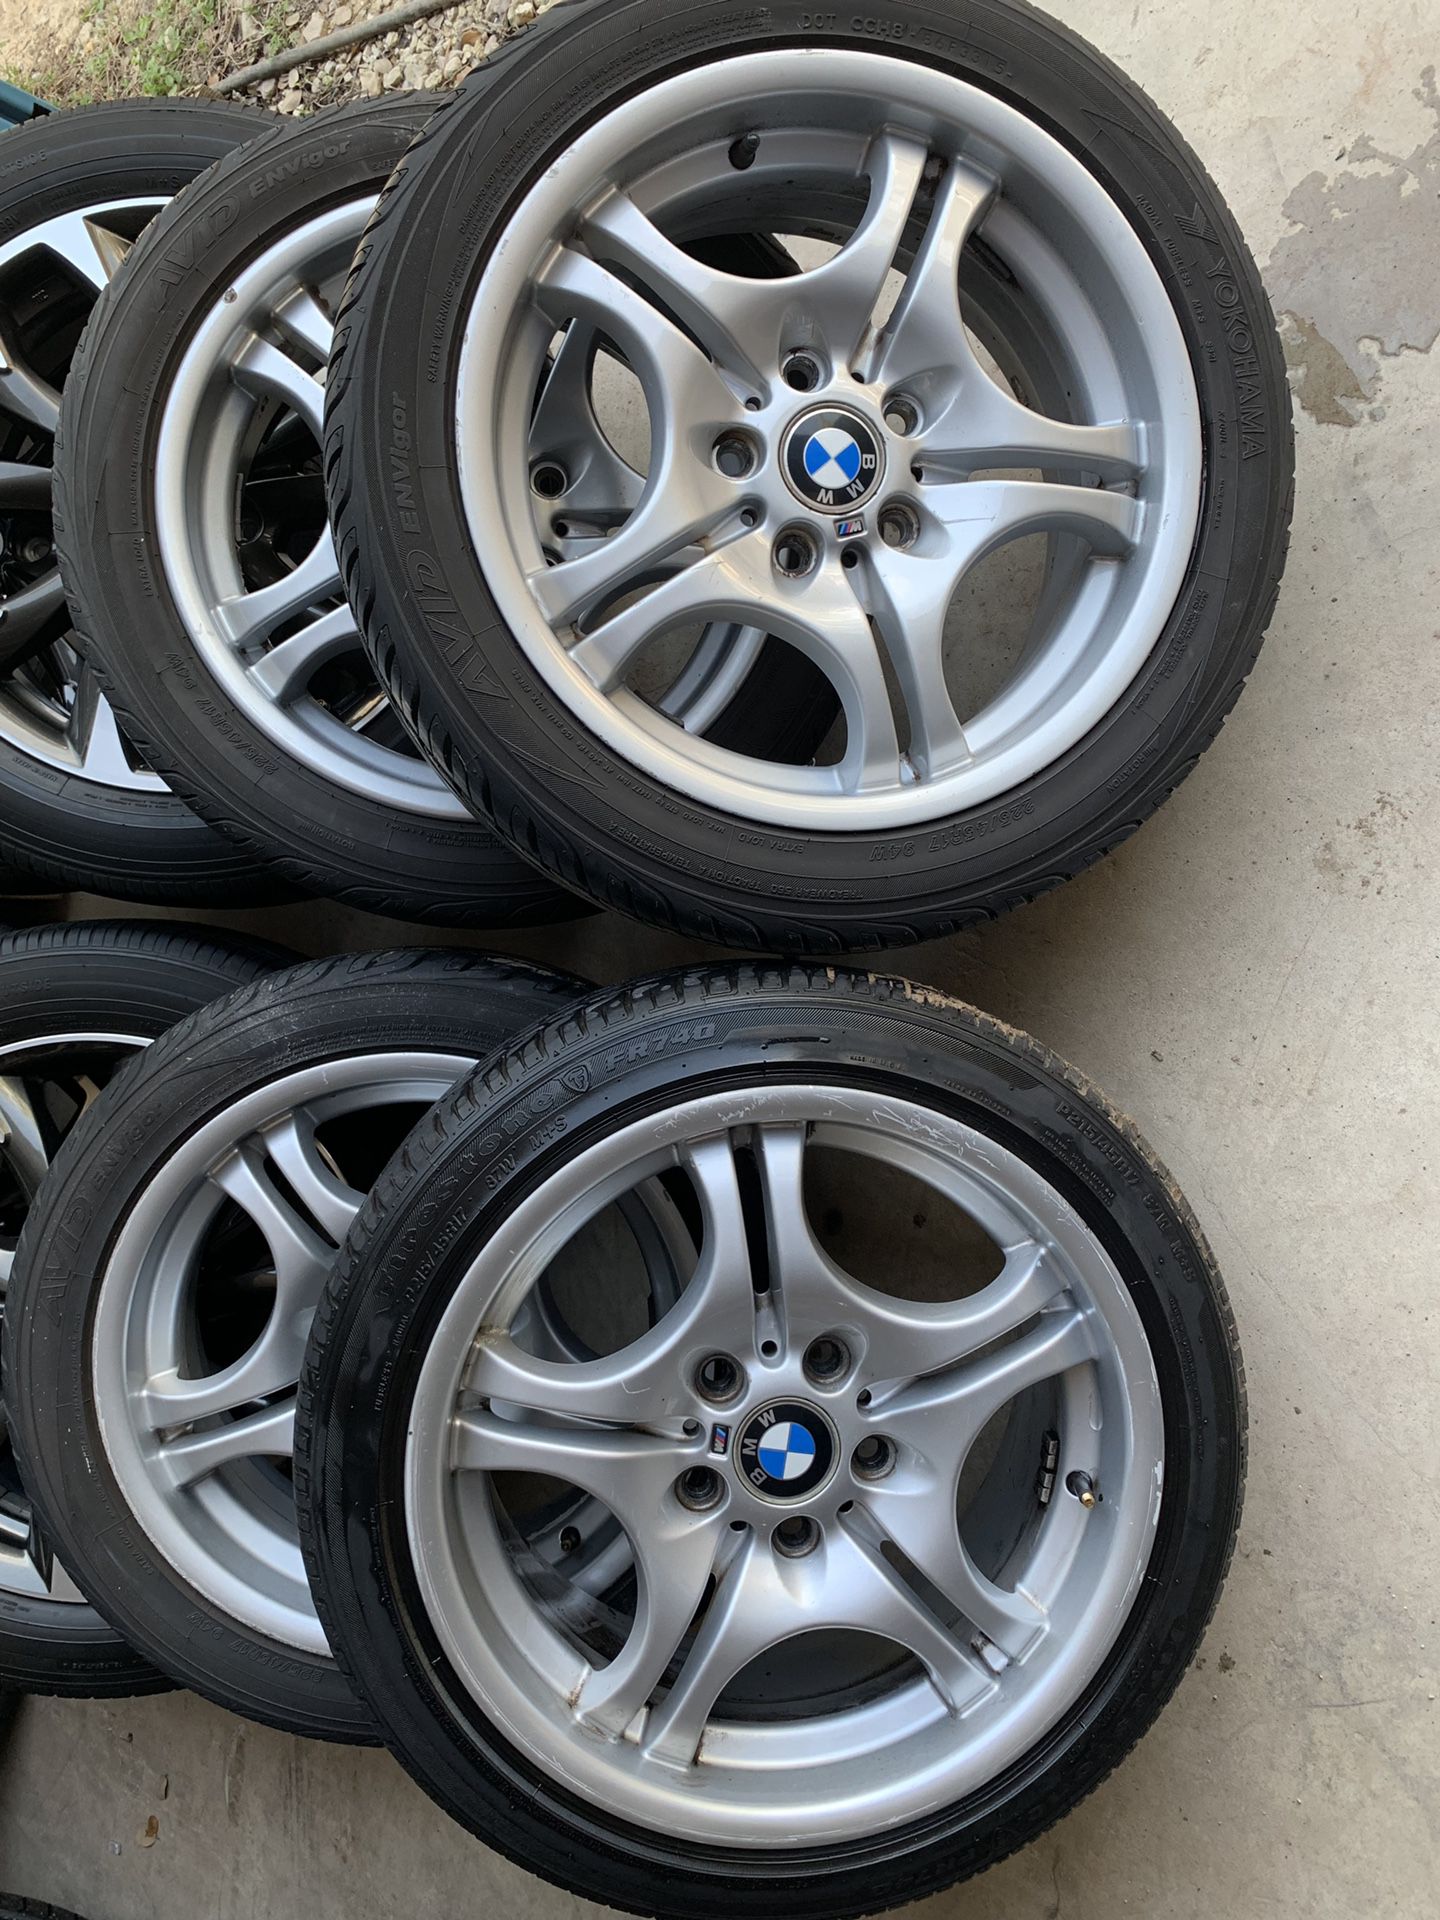 $300 for 4 bmw wheels